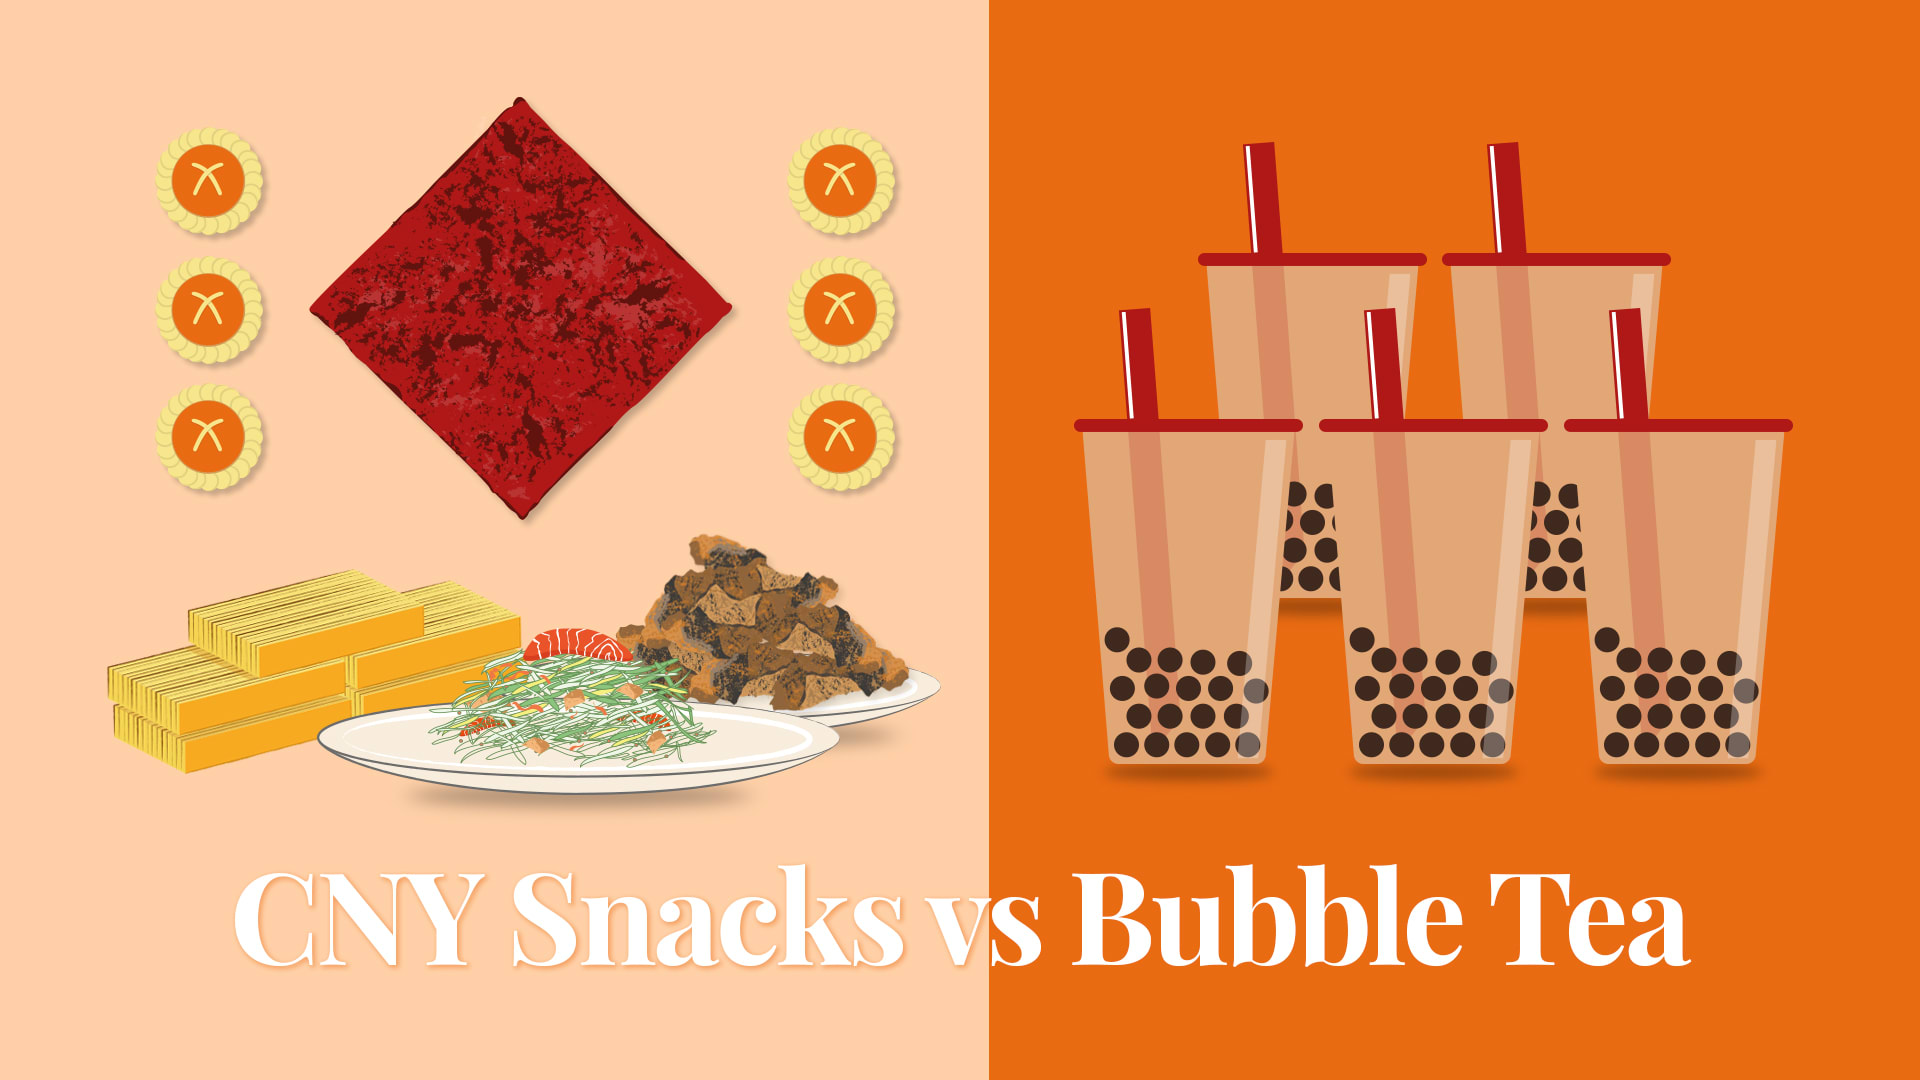 Chinese New Year snacks Vs Bubble Tea: Which Has More Calories?